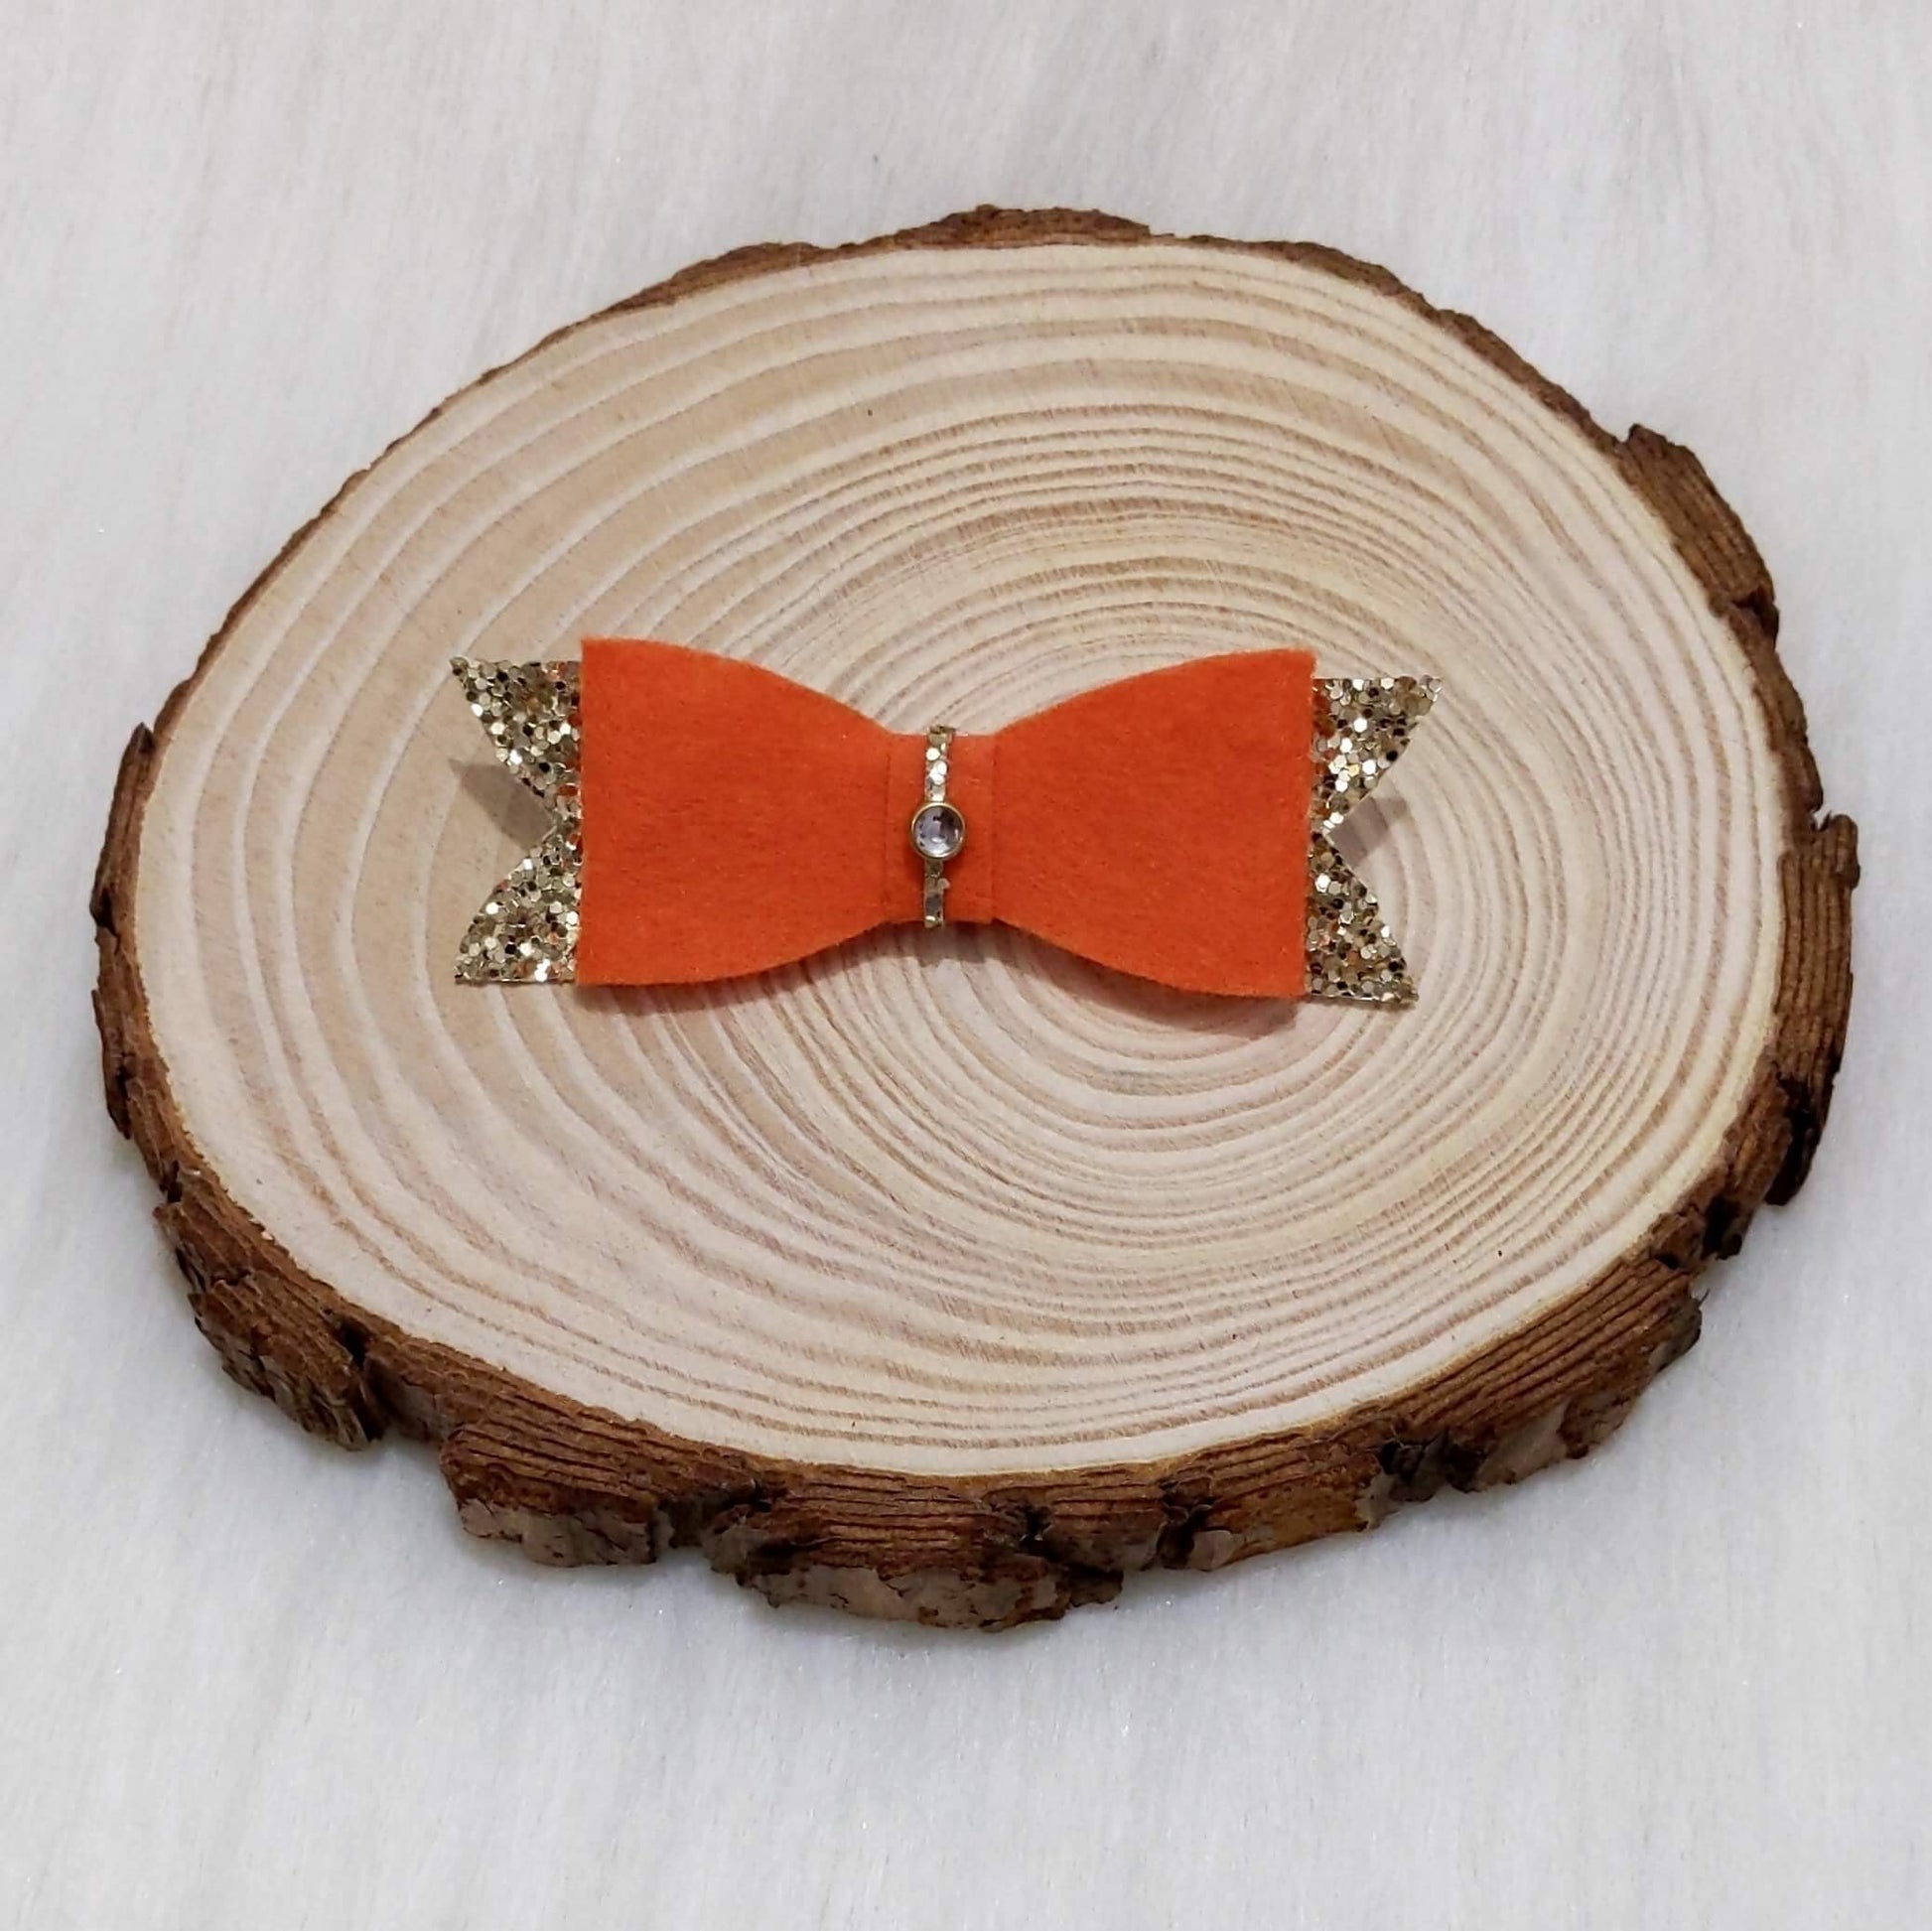 Neon Orange Bow Hair Clip | Hair Accessories for Kids and Girls